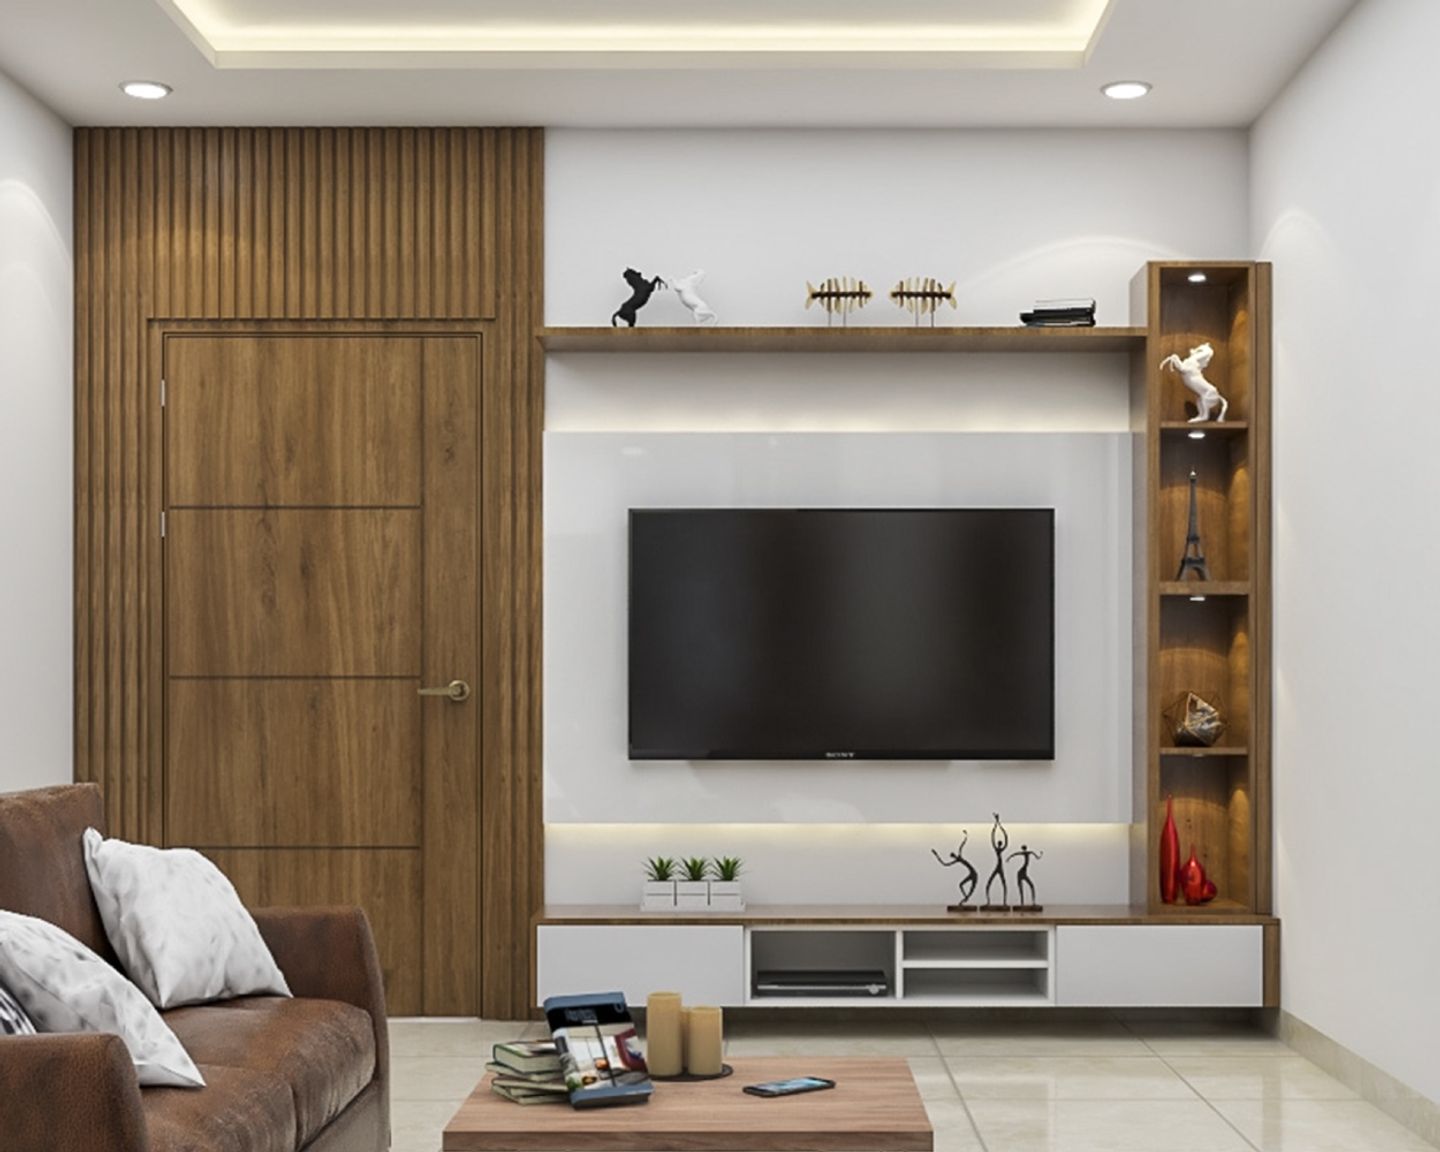 White And Wood TV Unit Design With Long Open Wall Shelf | Livspace